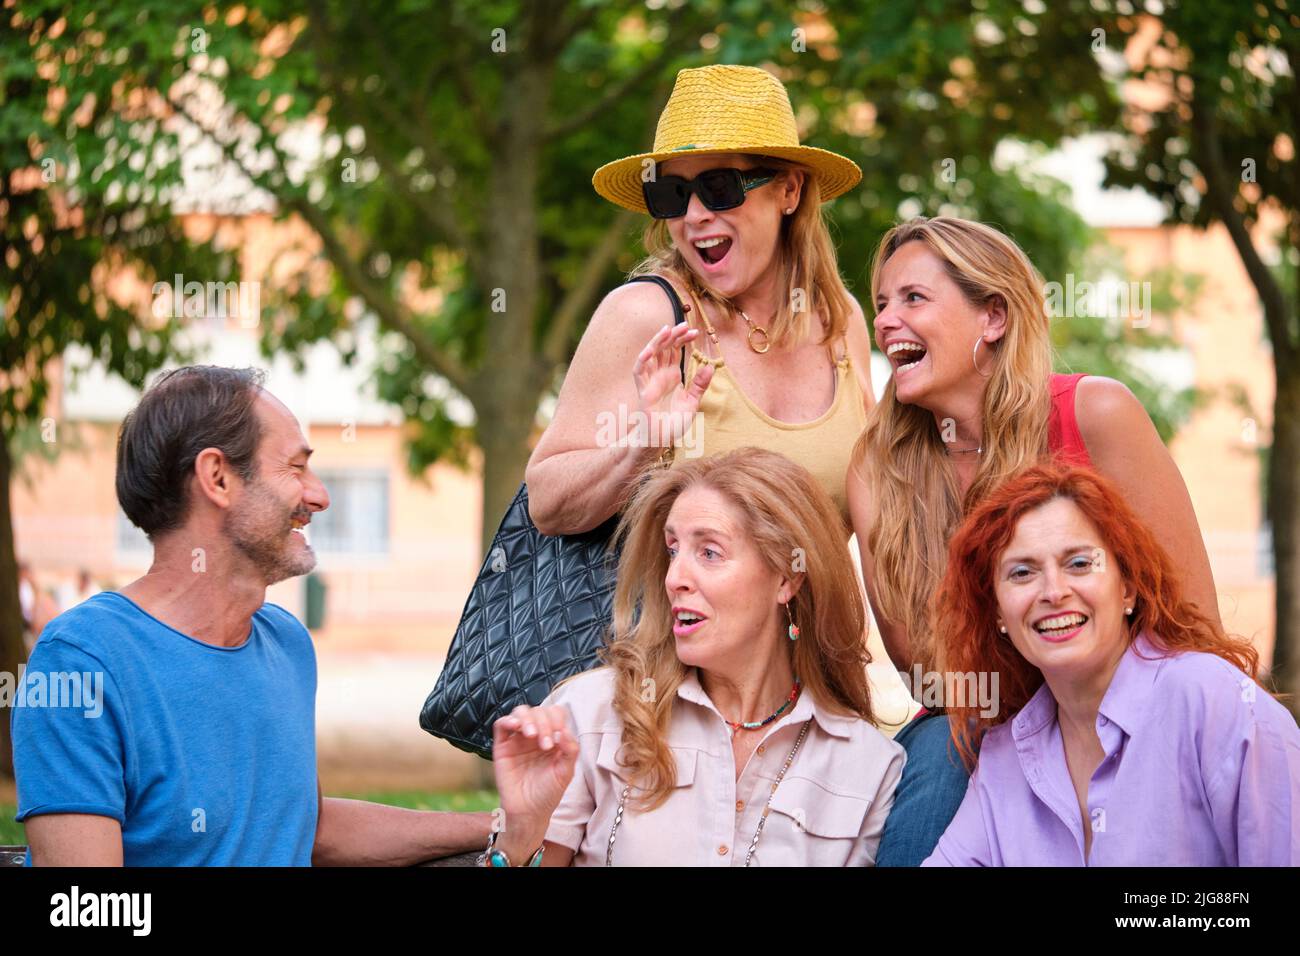 Five mature adults having fun in a park. Stock Photo